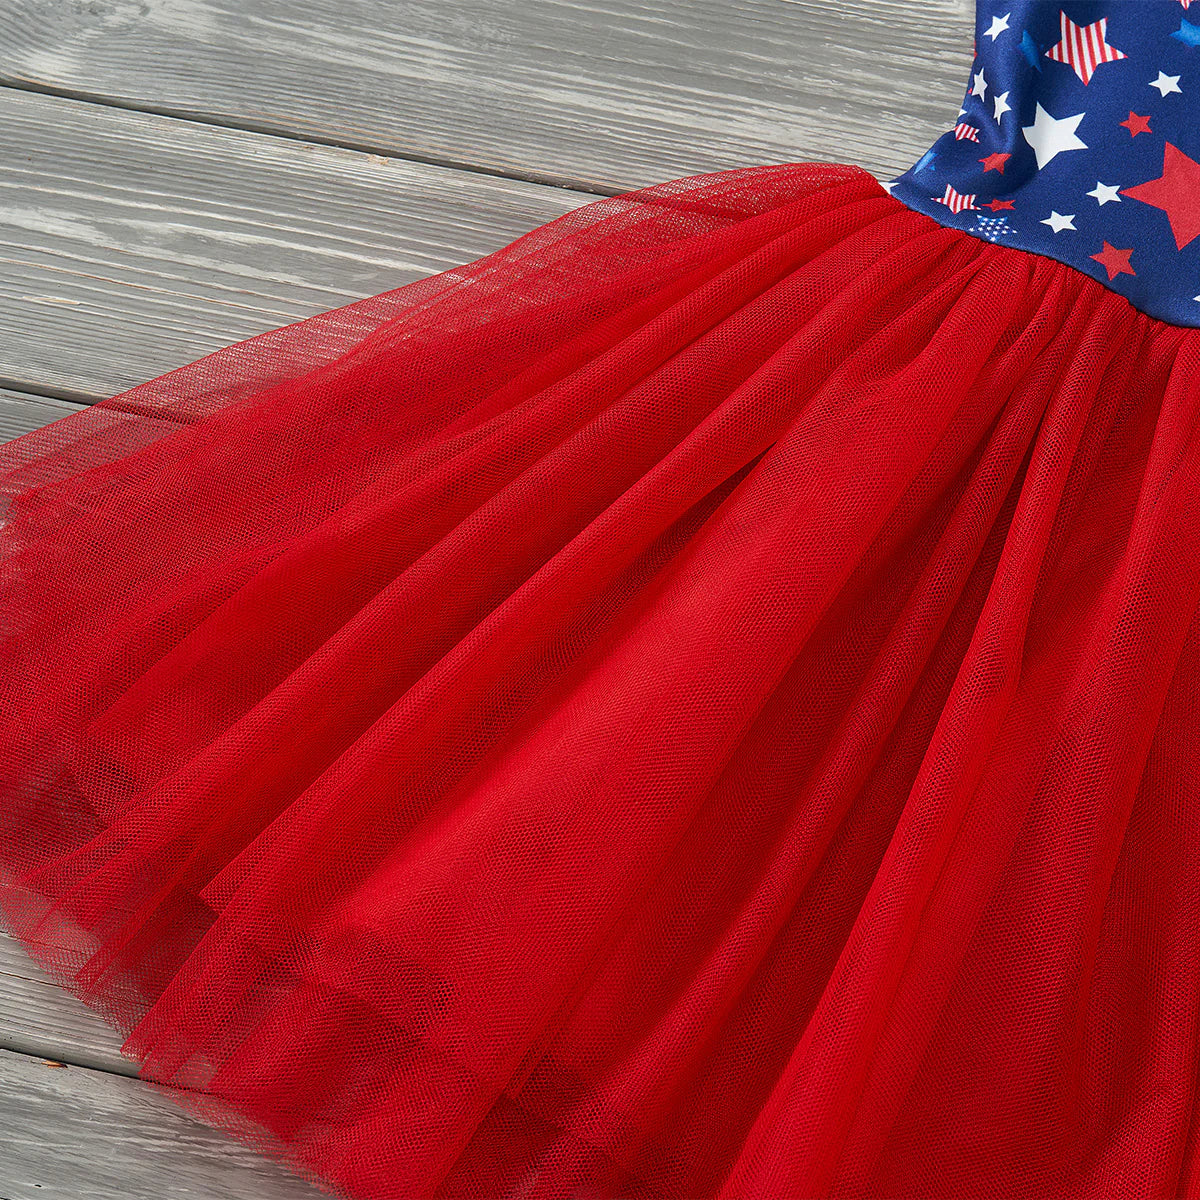 Star Spangled Tulle by Pete + Lucy